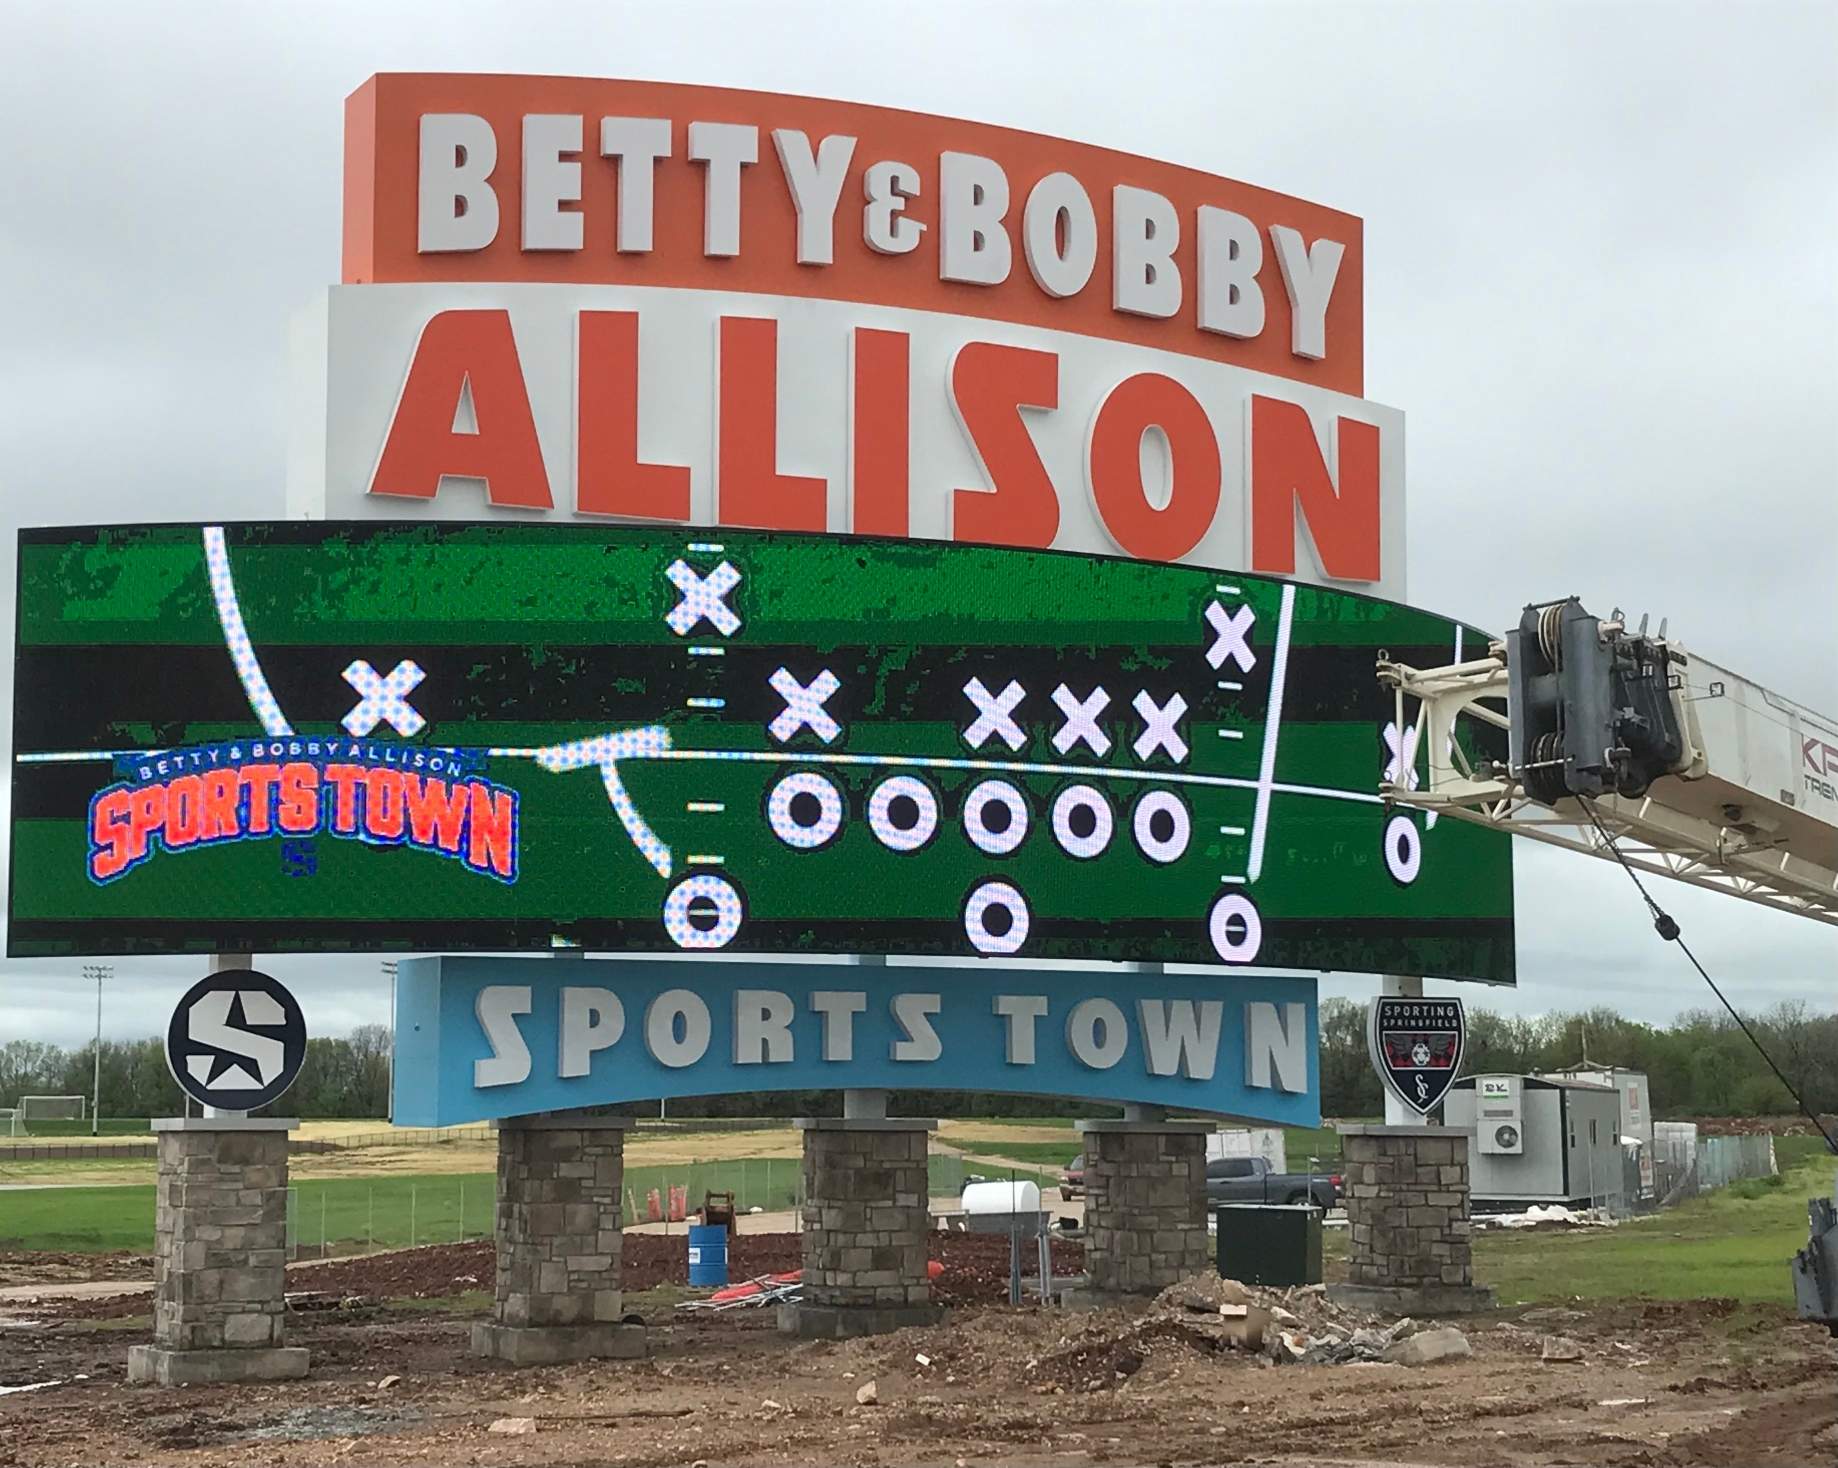 The sign outside Betty & Bobby Allison Sports Town